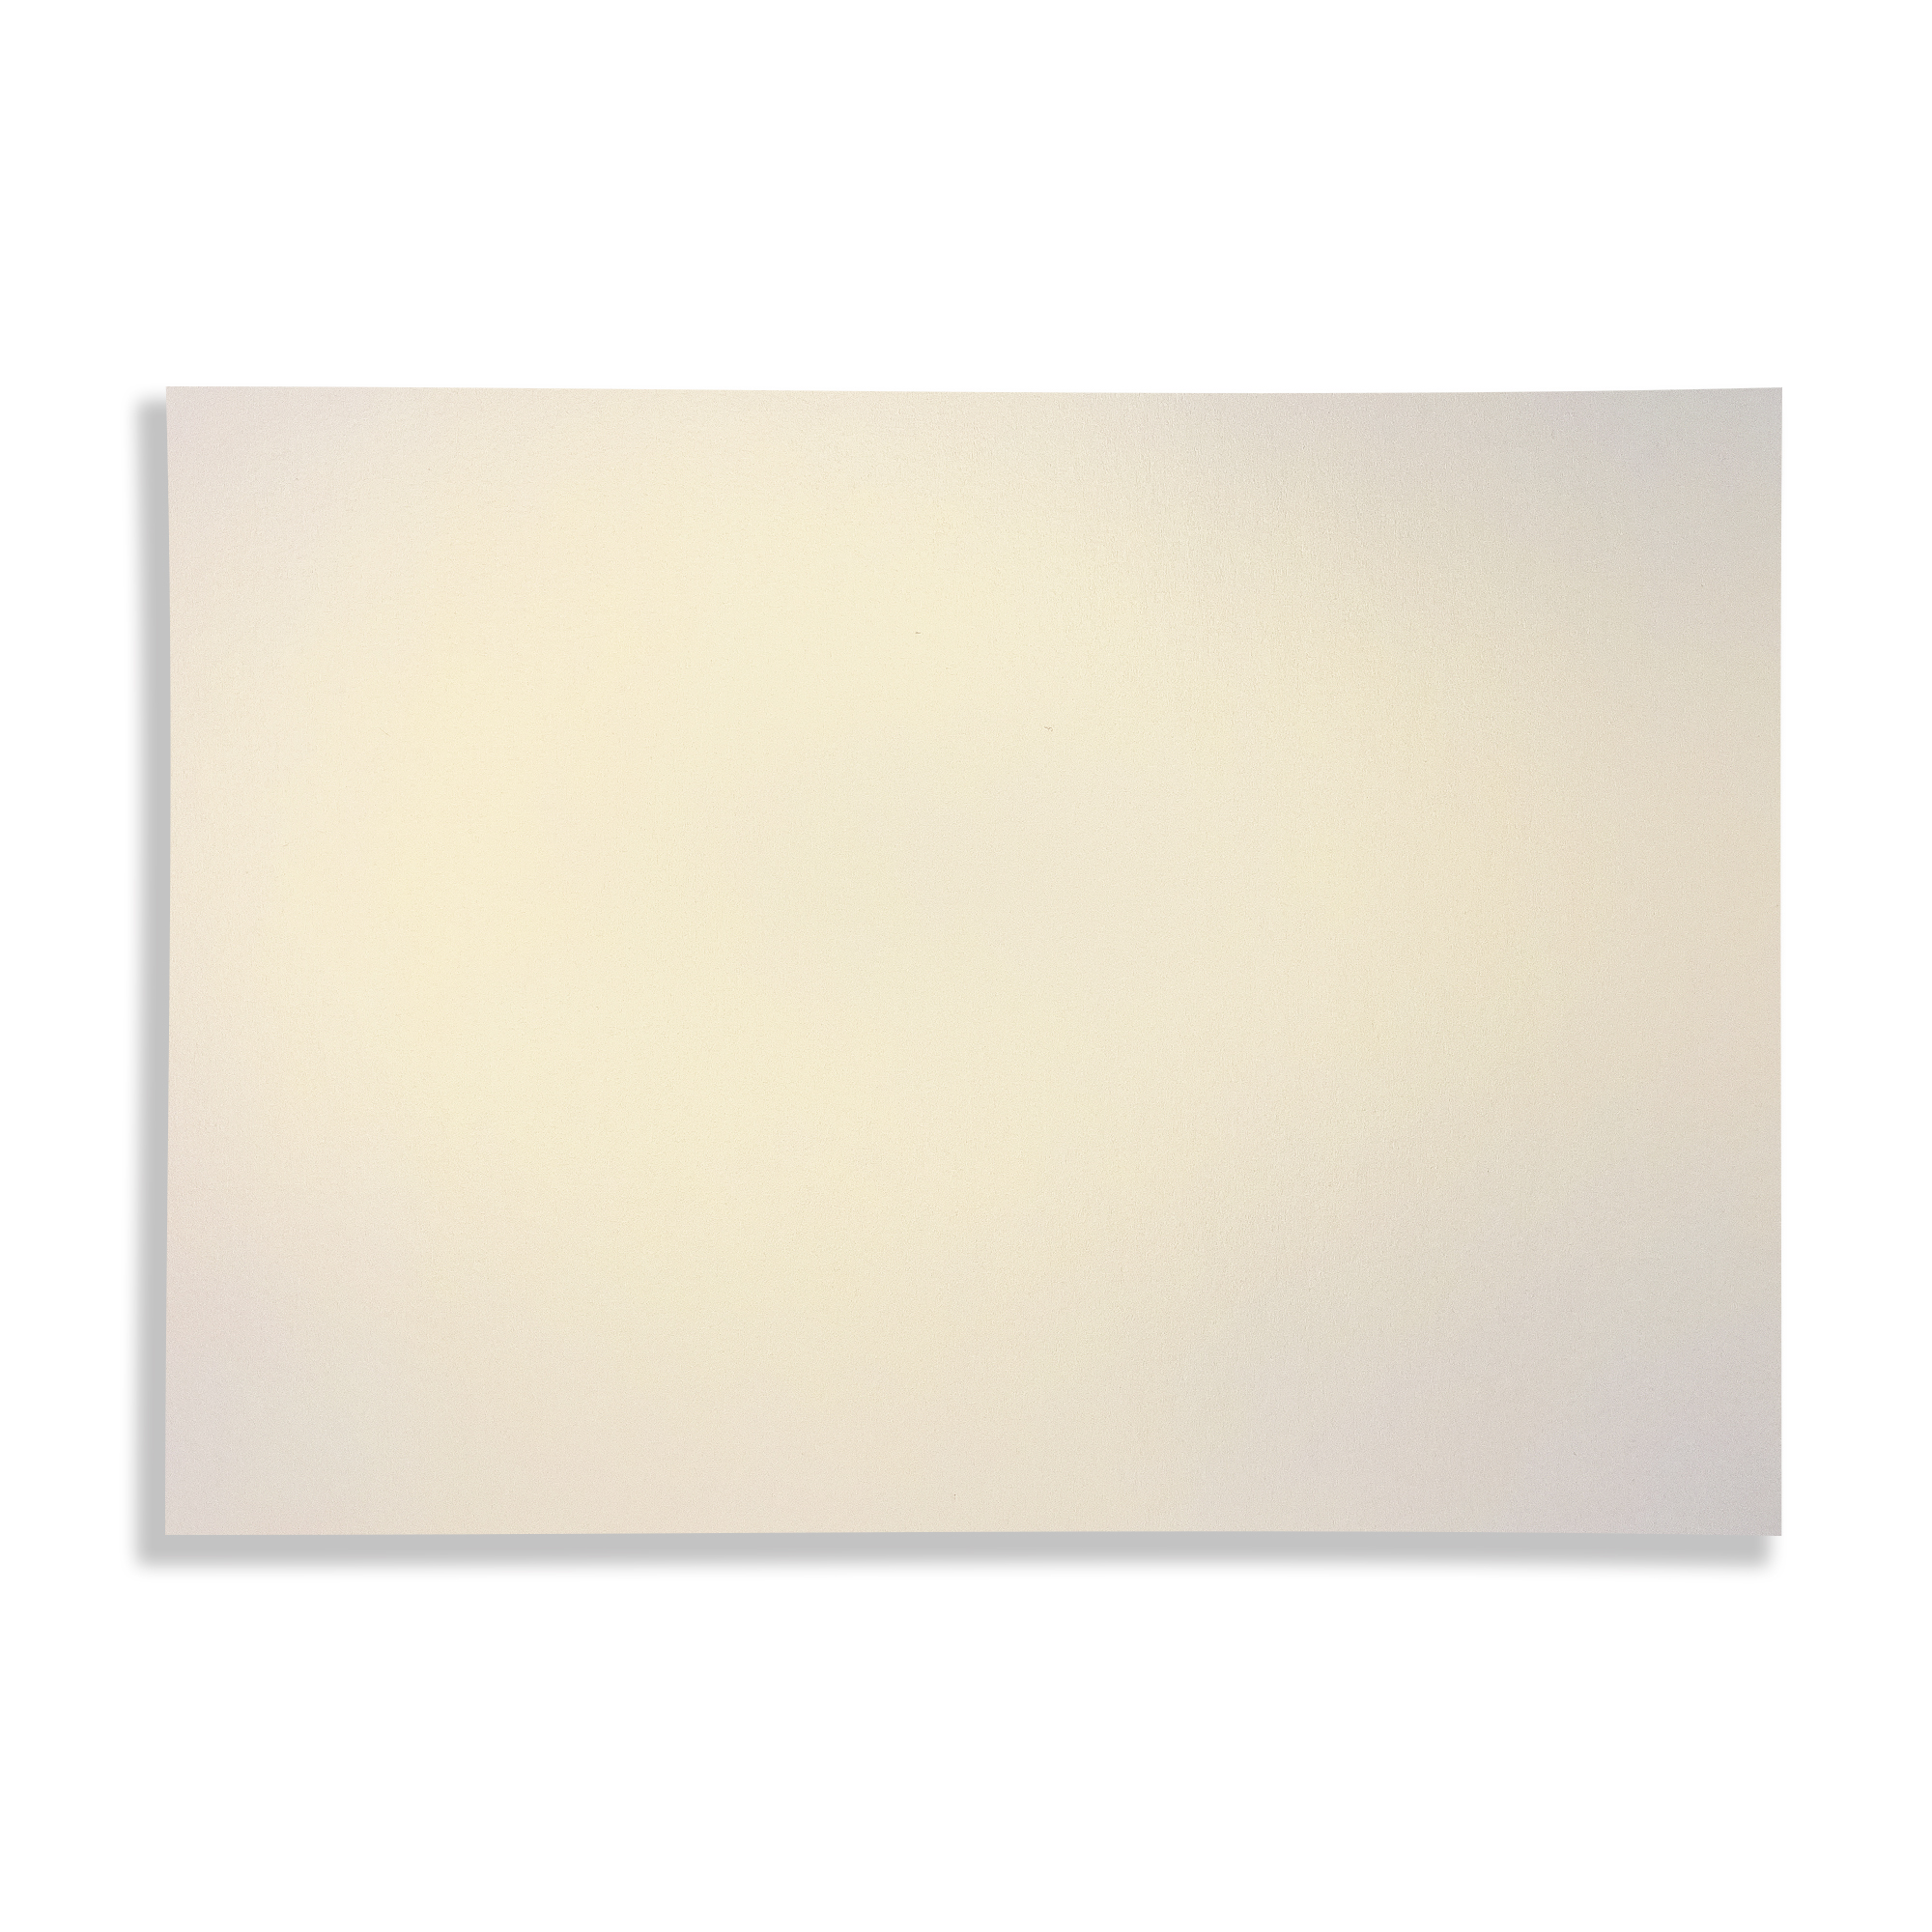 A5 COSMOS Pearl 300gsm Double-Sided Card – Gold White